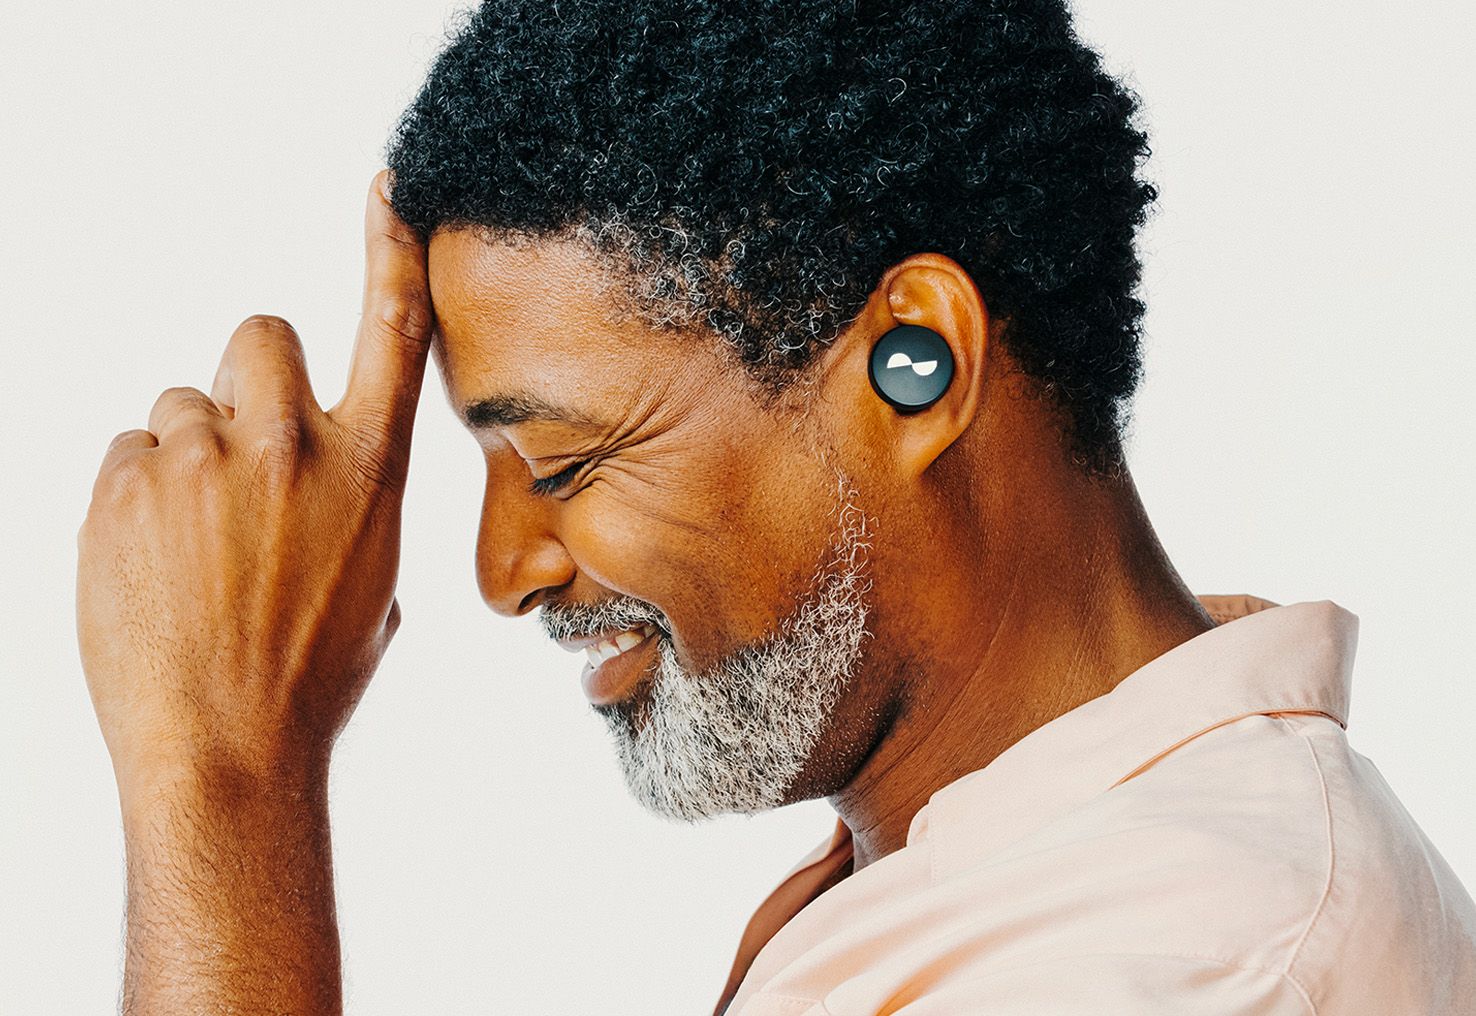 Person with eyes closed listening to sound with NURATRUE earbuds in ears